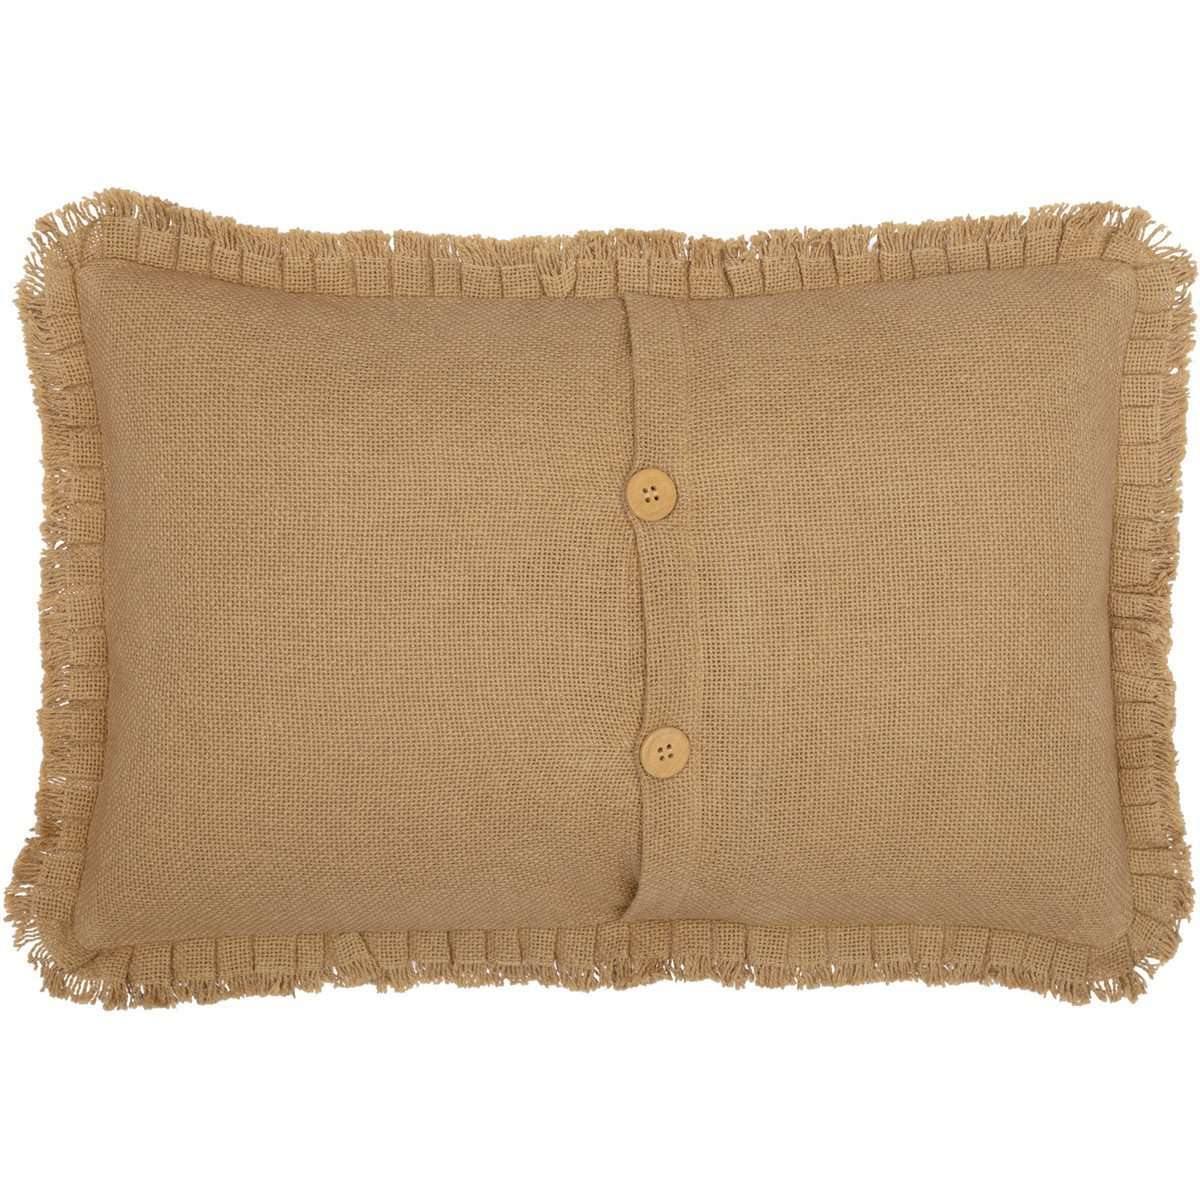 Burlap Natural Pillow w/ Fringed Ruffle 14x22 VHC Brands back